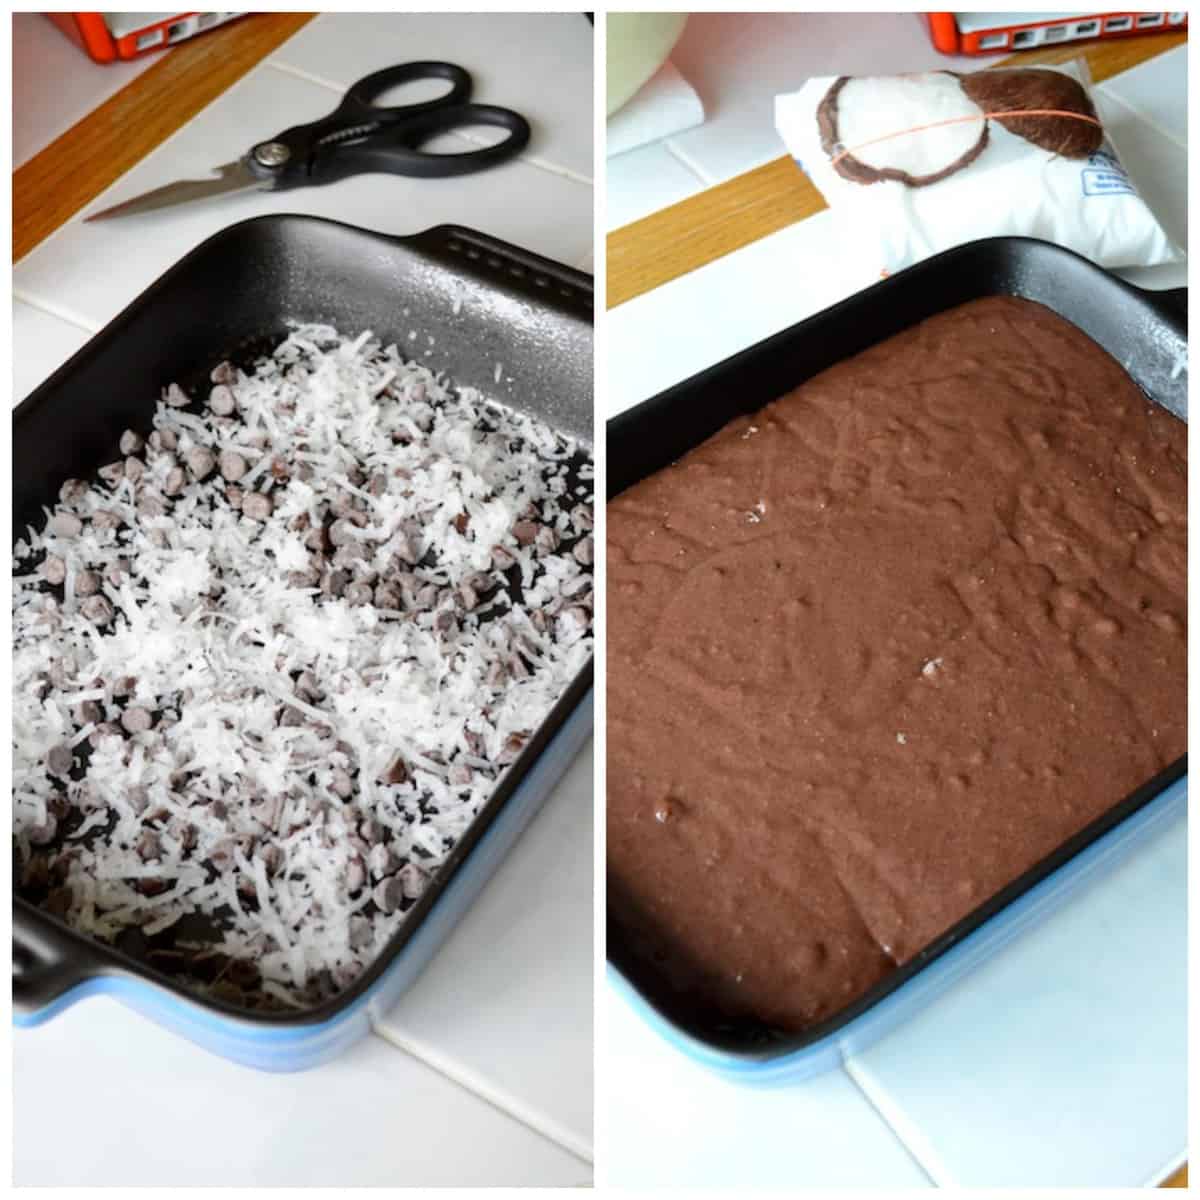 2 photos of ingredients in 9x13 inch cake pan - chocolate chips and coconut and cake batter